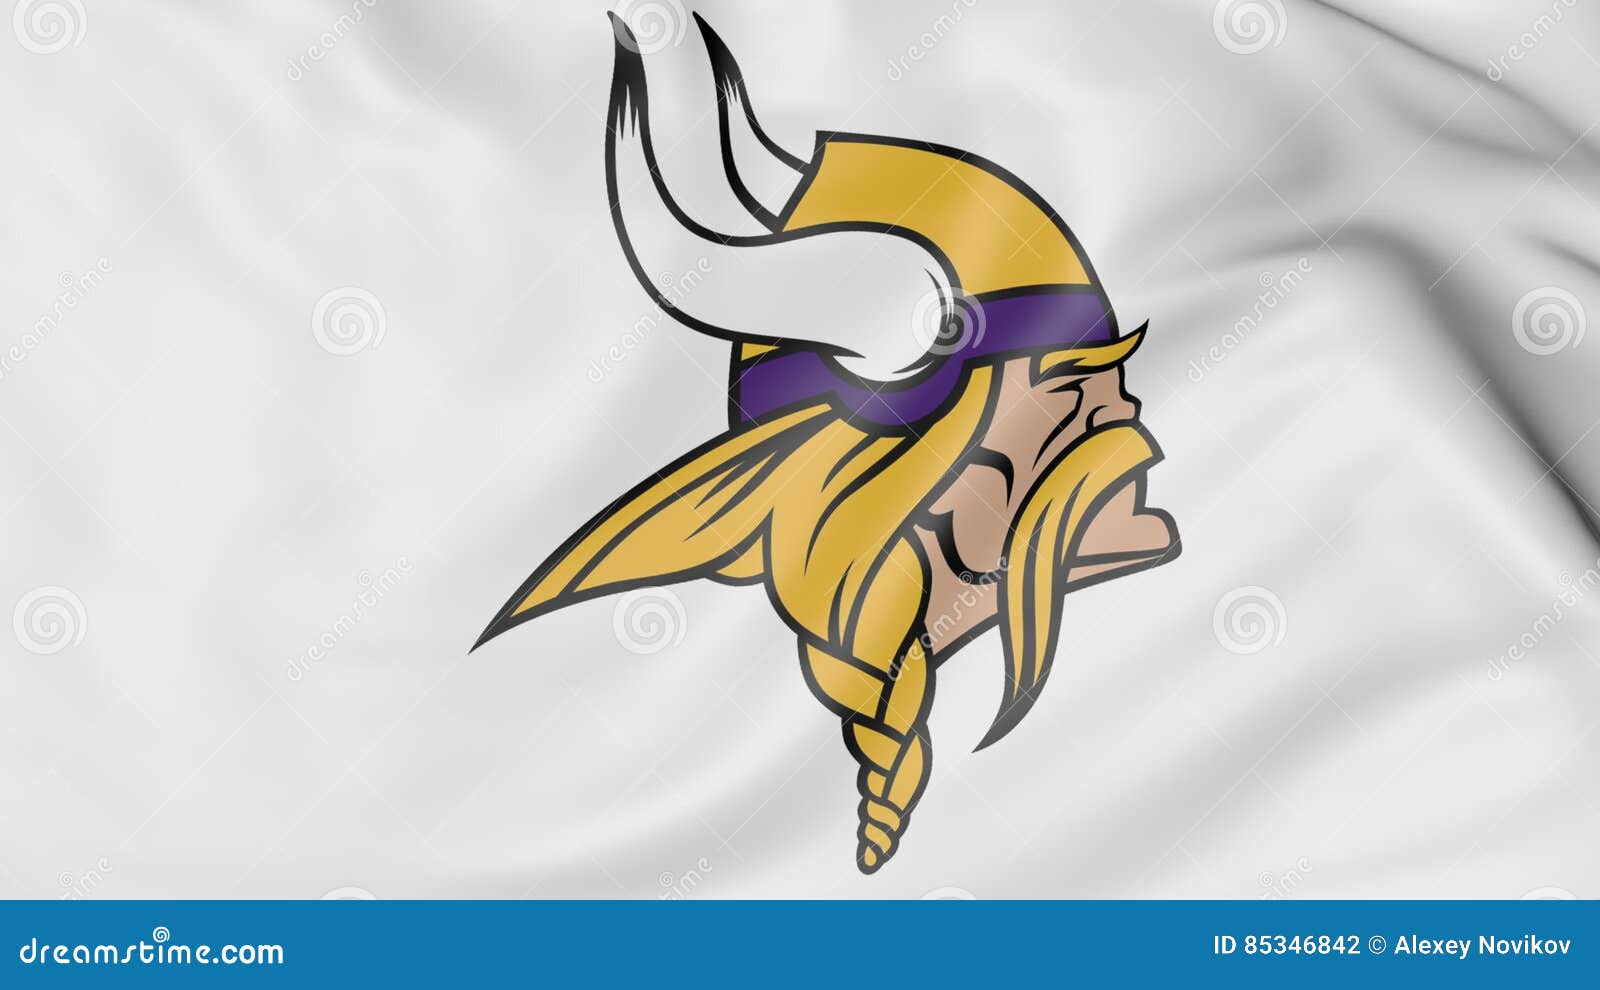 Close-up of Waving Flag with Minnesota Vikings NFL American Football Team  Logo, 3D Rendering Editorial Photography - Illustration of league, emblem:  85346842